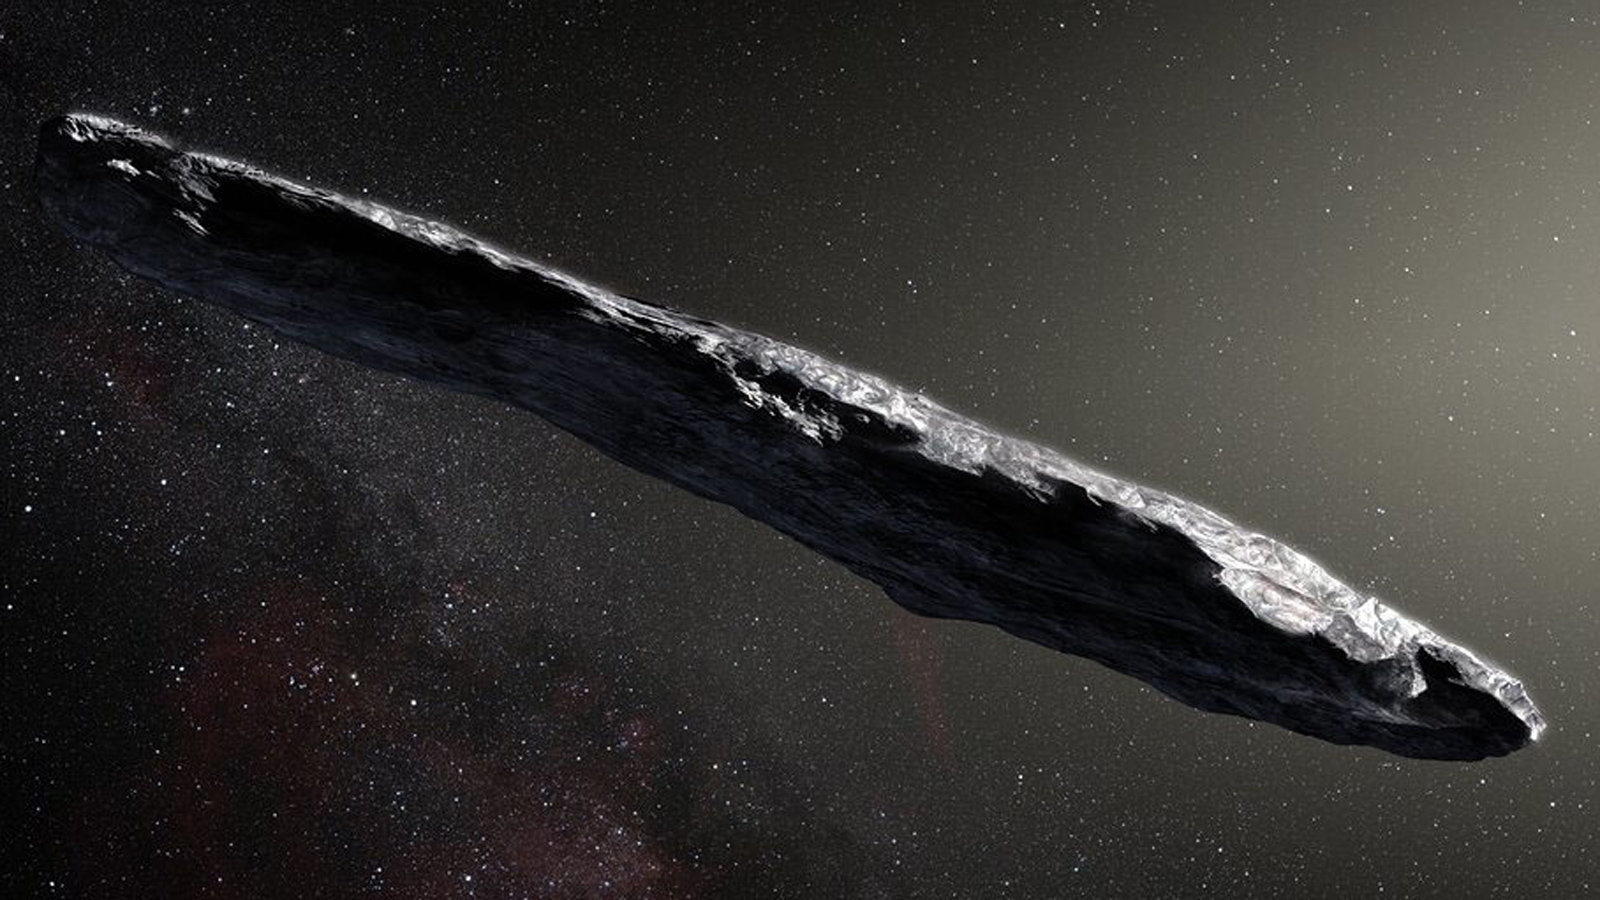 Strange interstellar object 'Oumuamua is tiny and very reflective